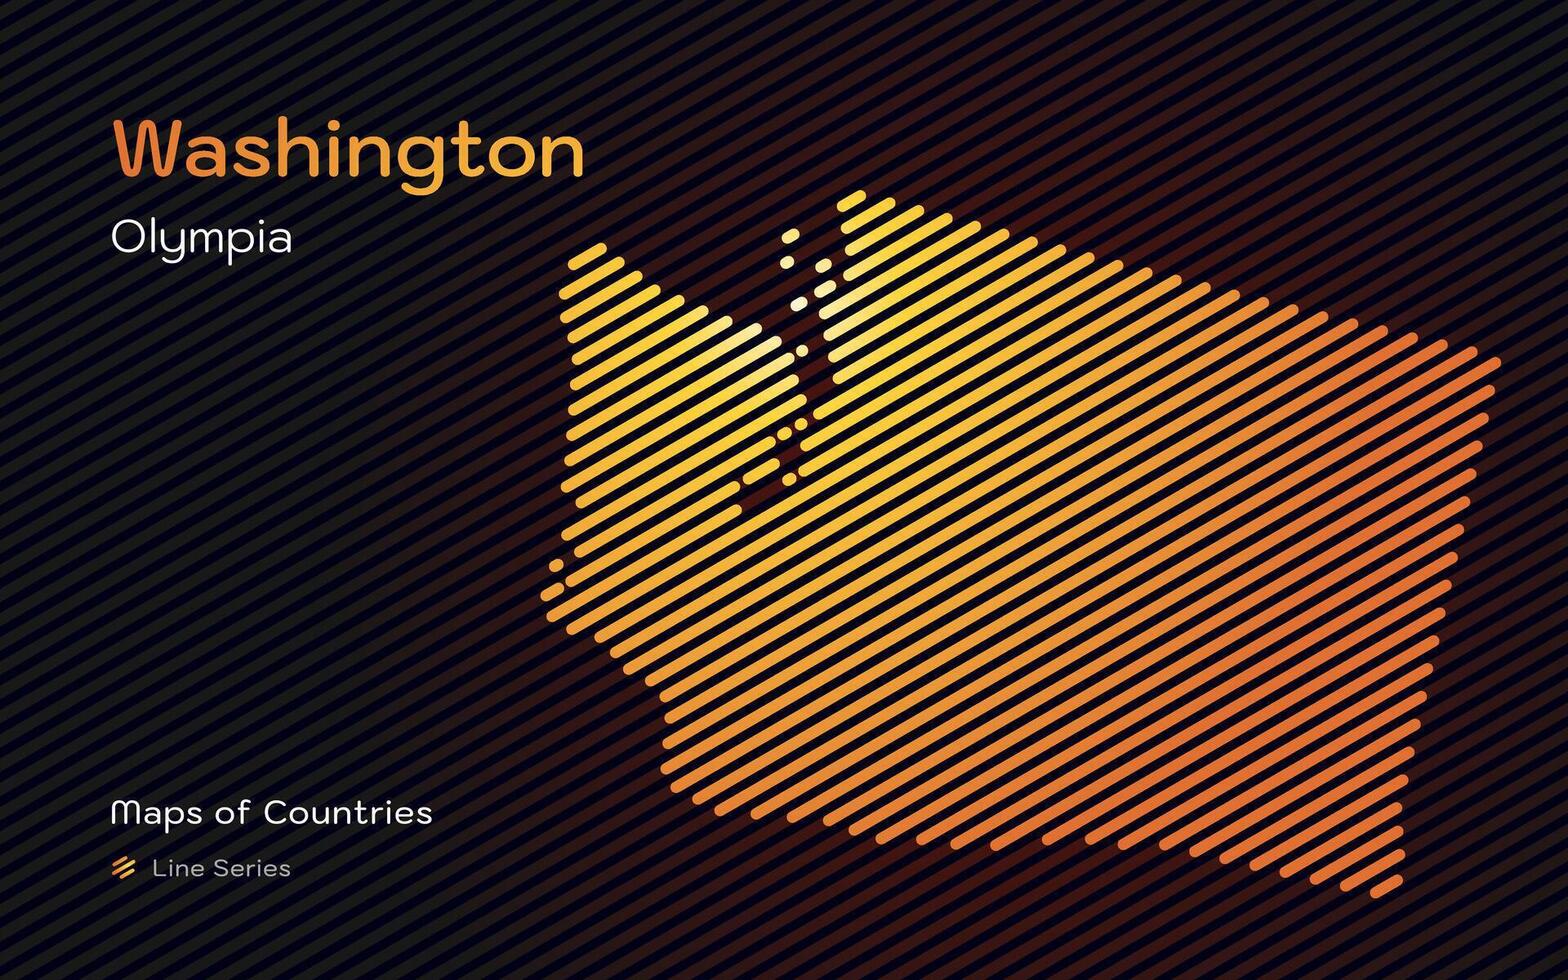 Washington State Map in a Line Pattern. Stylized simple map vector